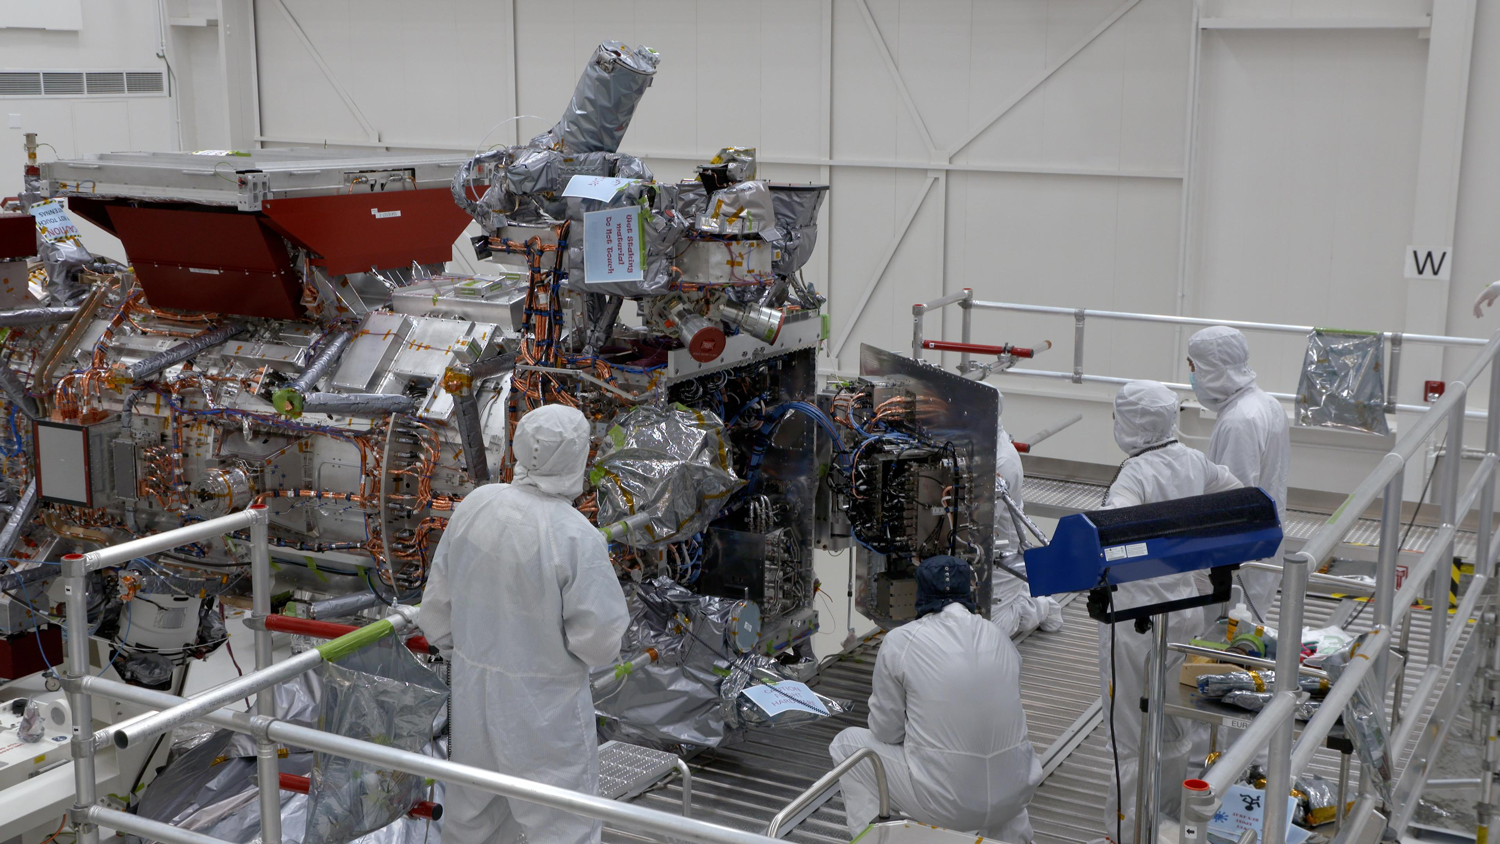 Engineers and technicians are seen closing the vault of NASA's Europa Clipper in the main clean room of the Spacecraft Assembly Facility at the agency's Jet Propulsion Laboratory in Southern California on Oct. 7, 2023. The vault will protect the sophisticated electronics of the spacecraft as it orbits Jupiter and endures one of the most punishing radiation environments in our solar system.